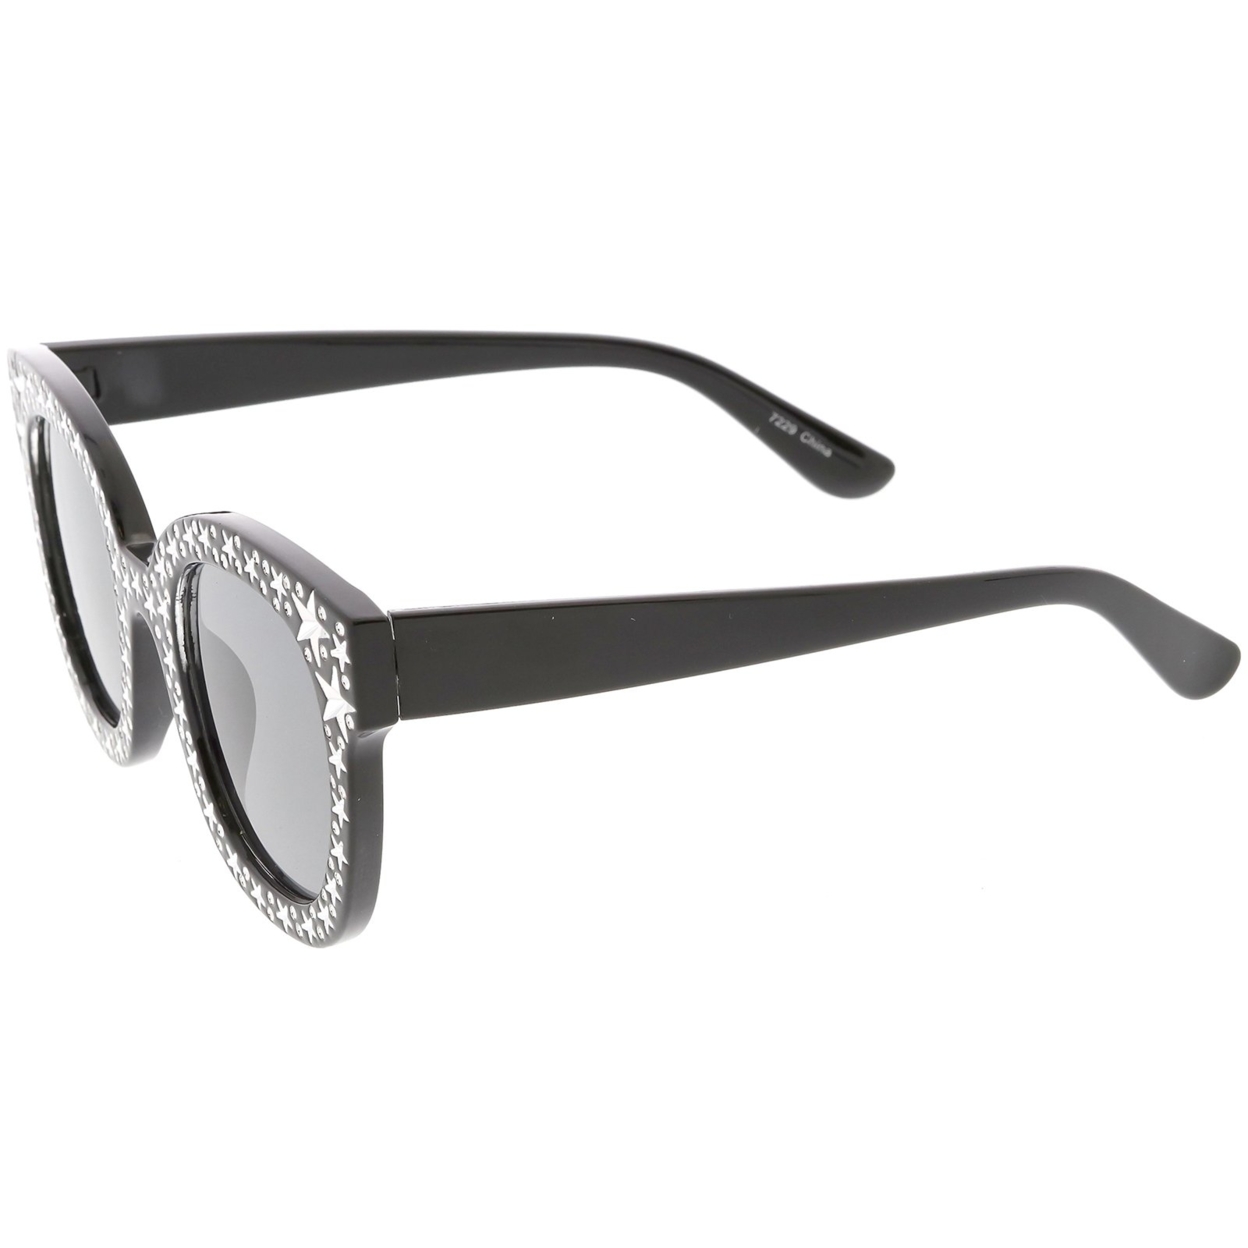 Oversize Star Accent Details Cat Eye Sunglasses Wide Arms Square Lens 48mm - Black / Smoke